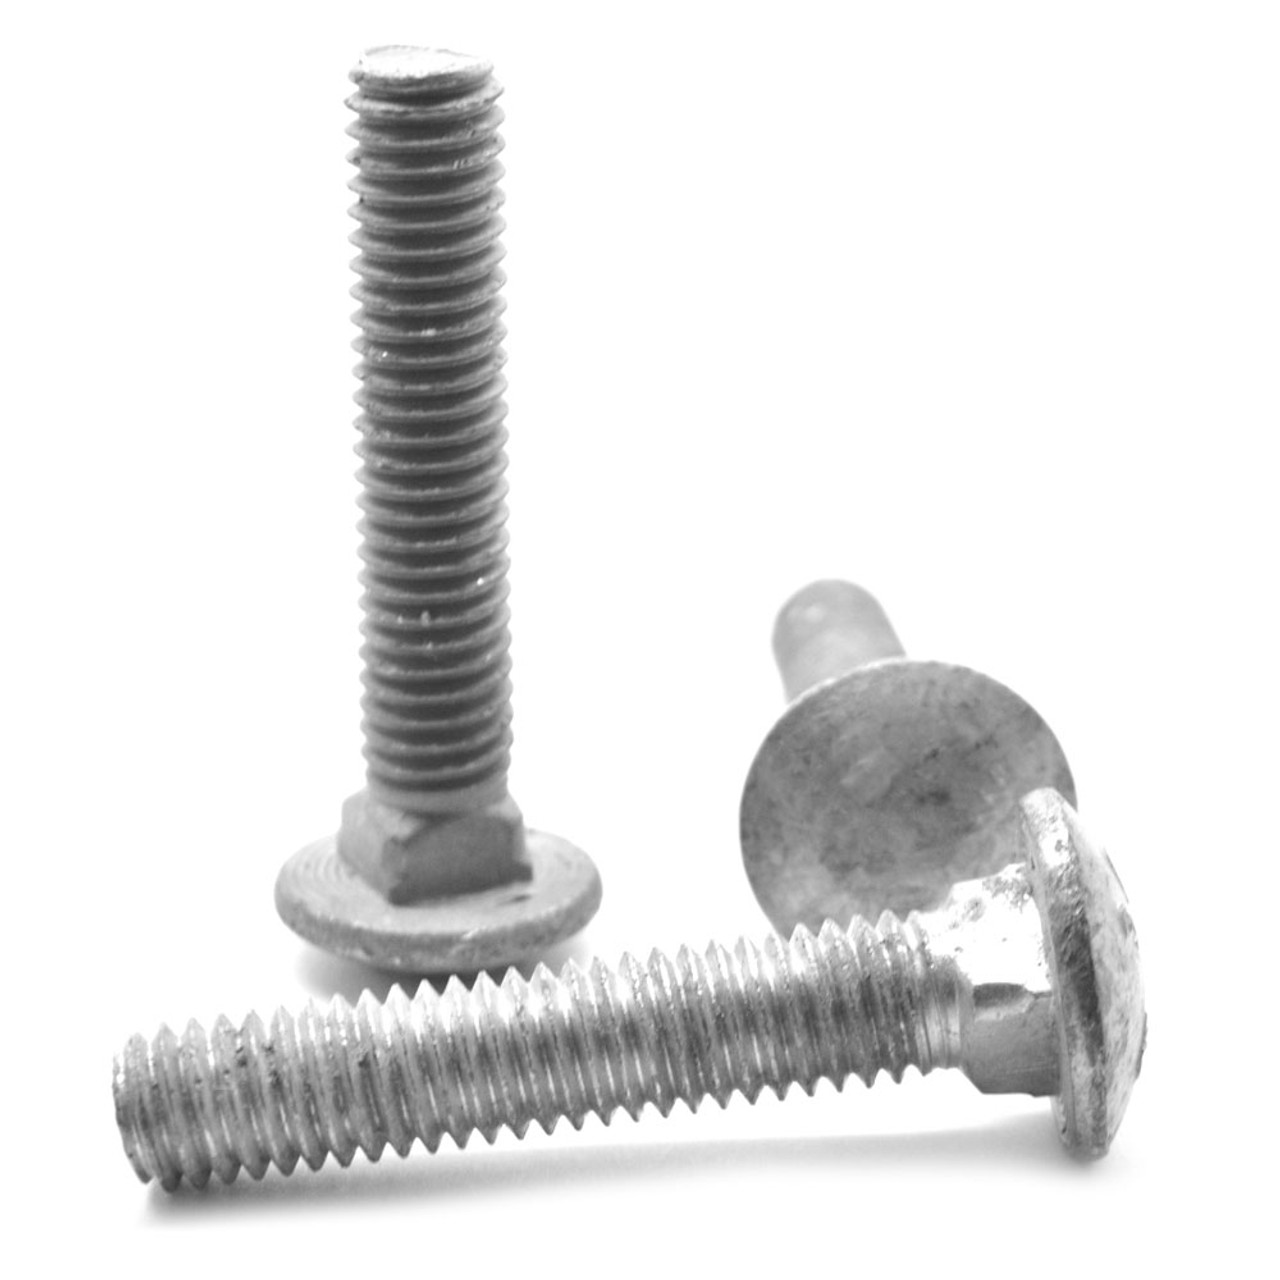 1/2"-13 x 1 1/2" (FT) Coarse Thread A307 Grade A Carriage Bolt Low Carbon Steel Hot Dip Galvanized